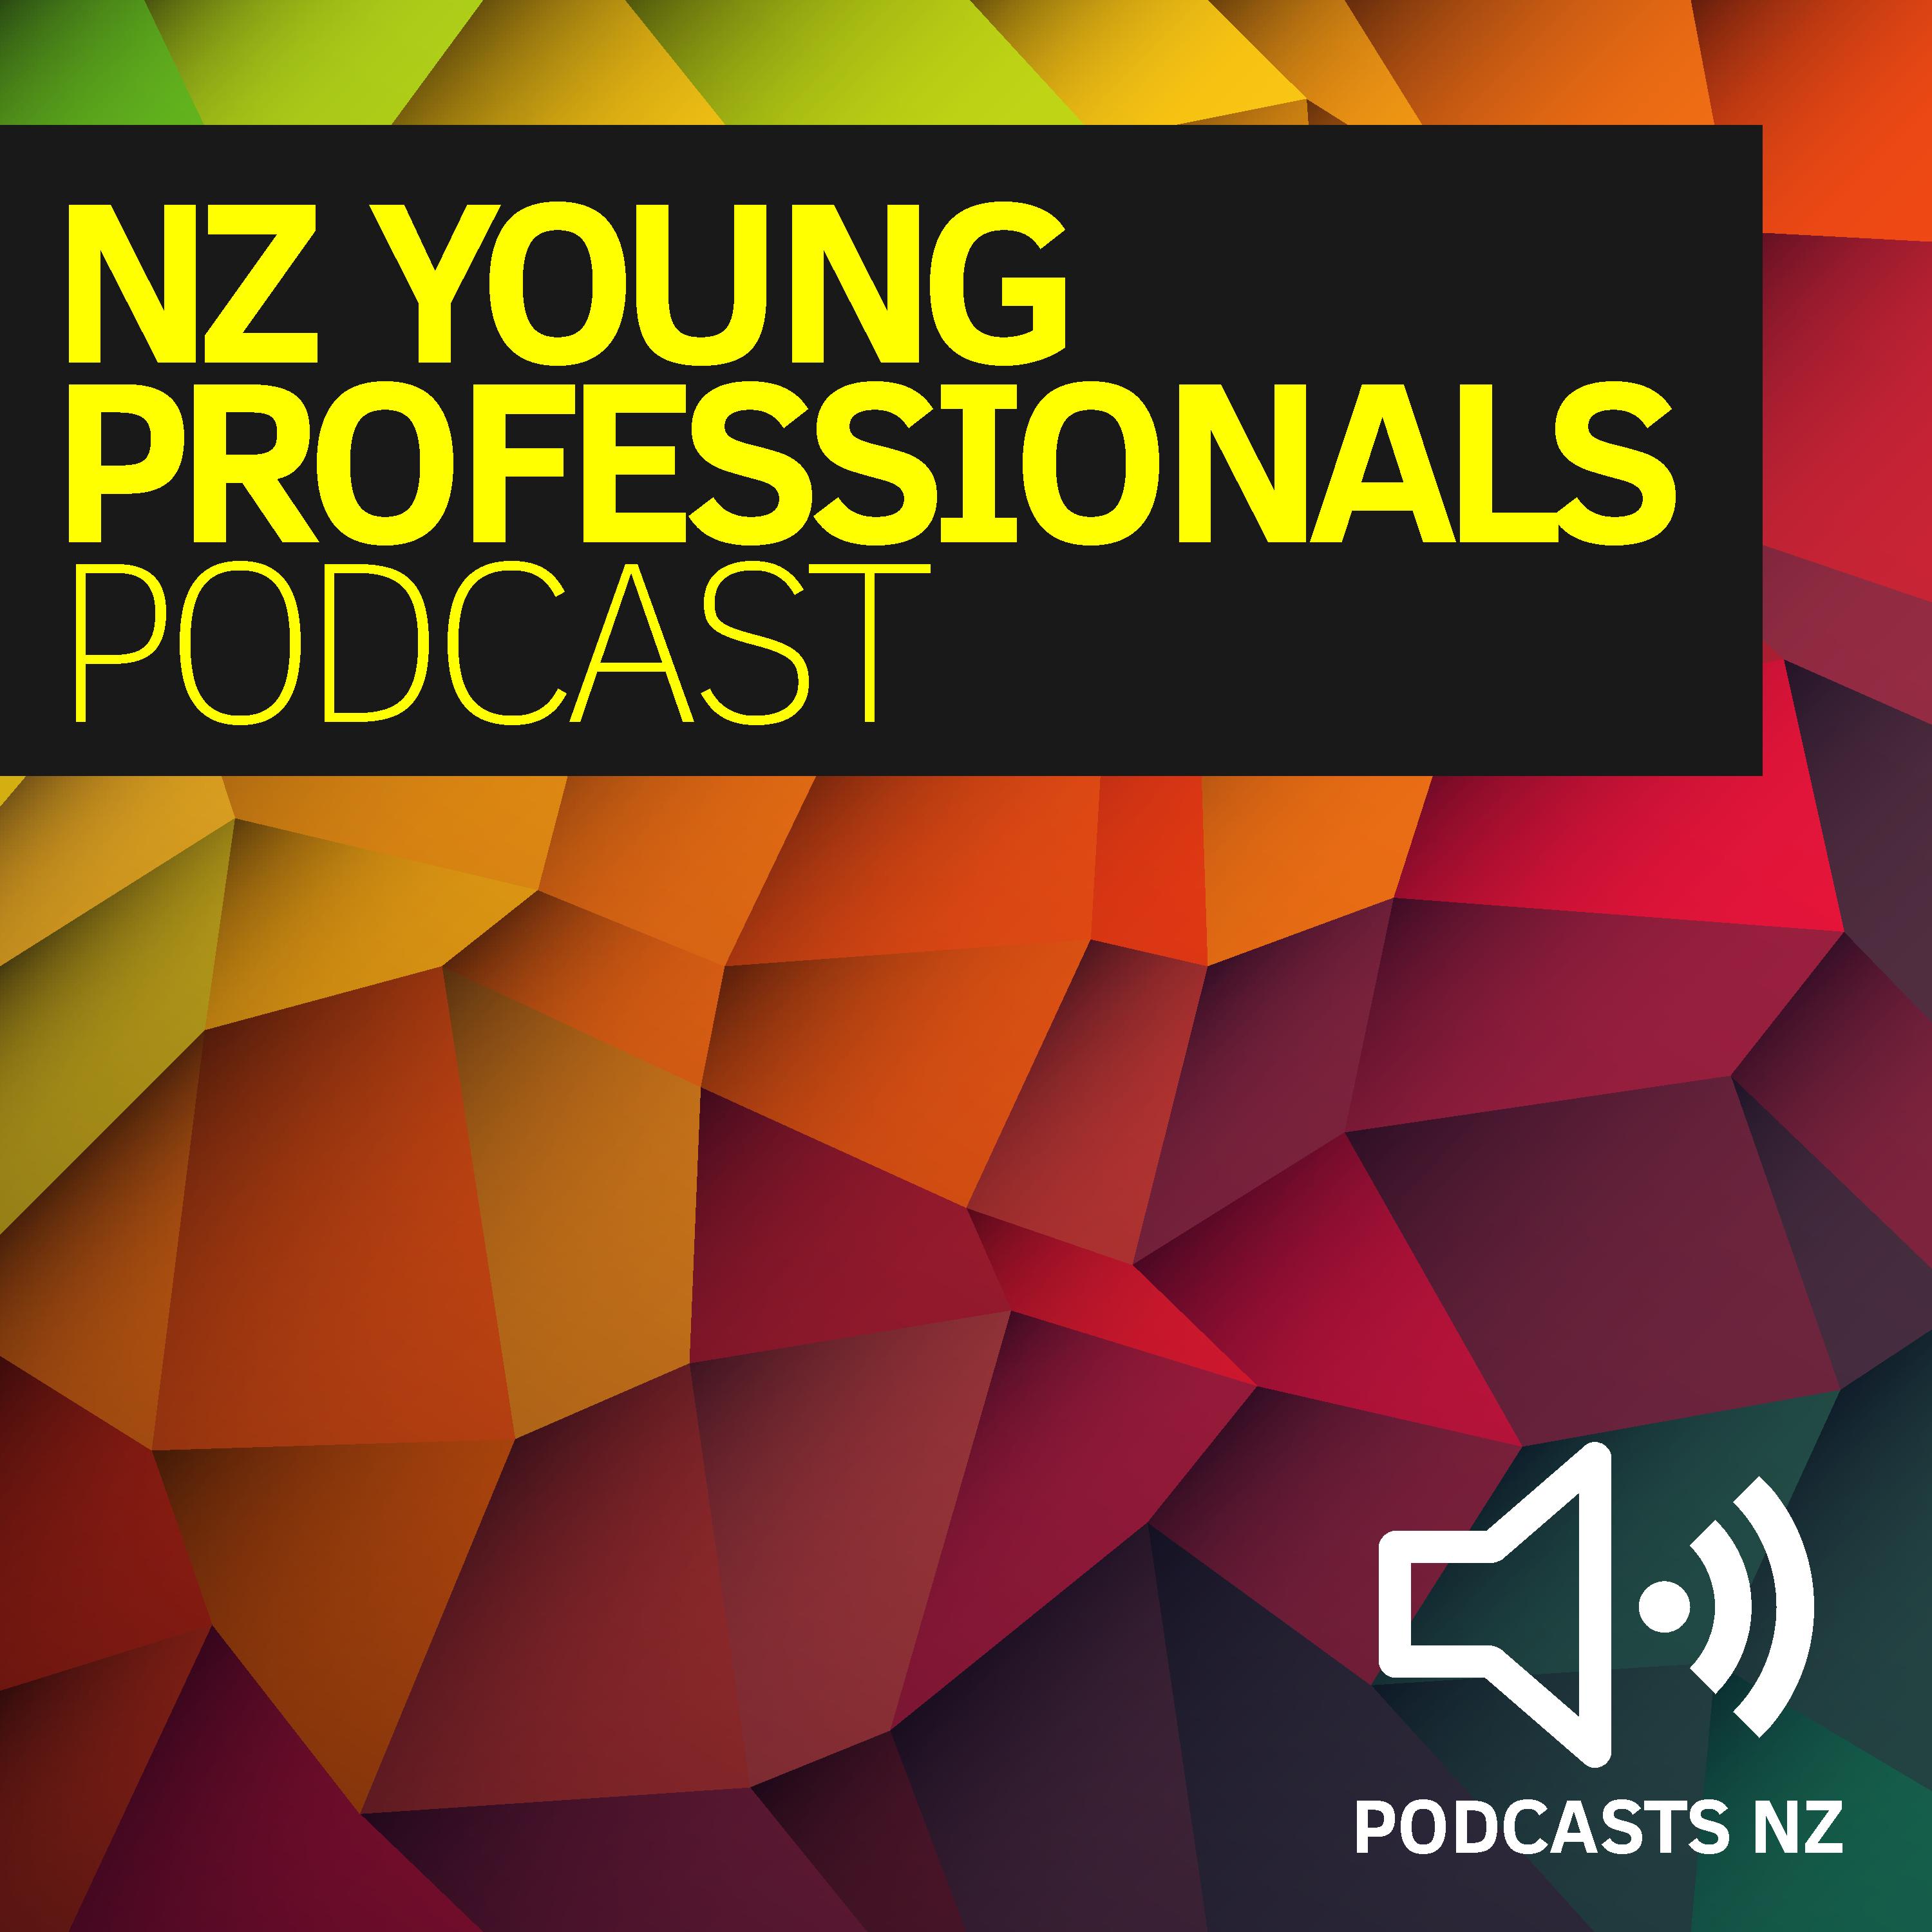 NZ Young Professionals Podcast